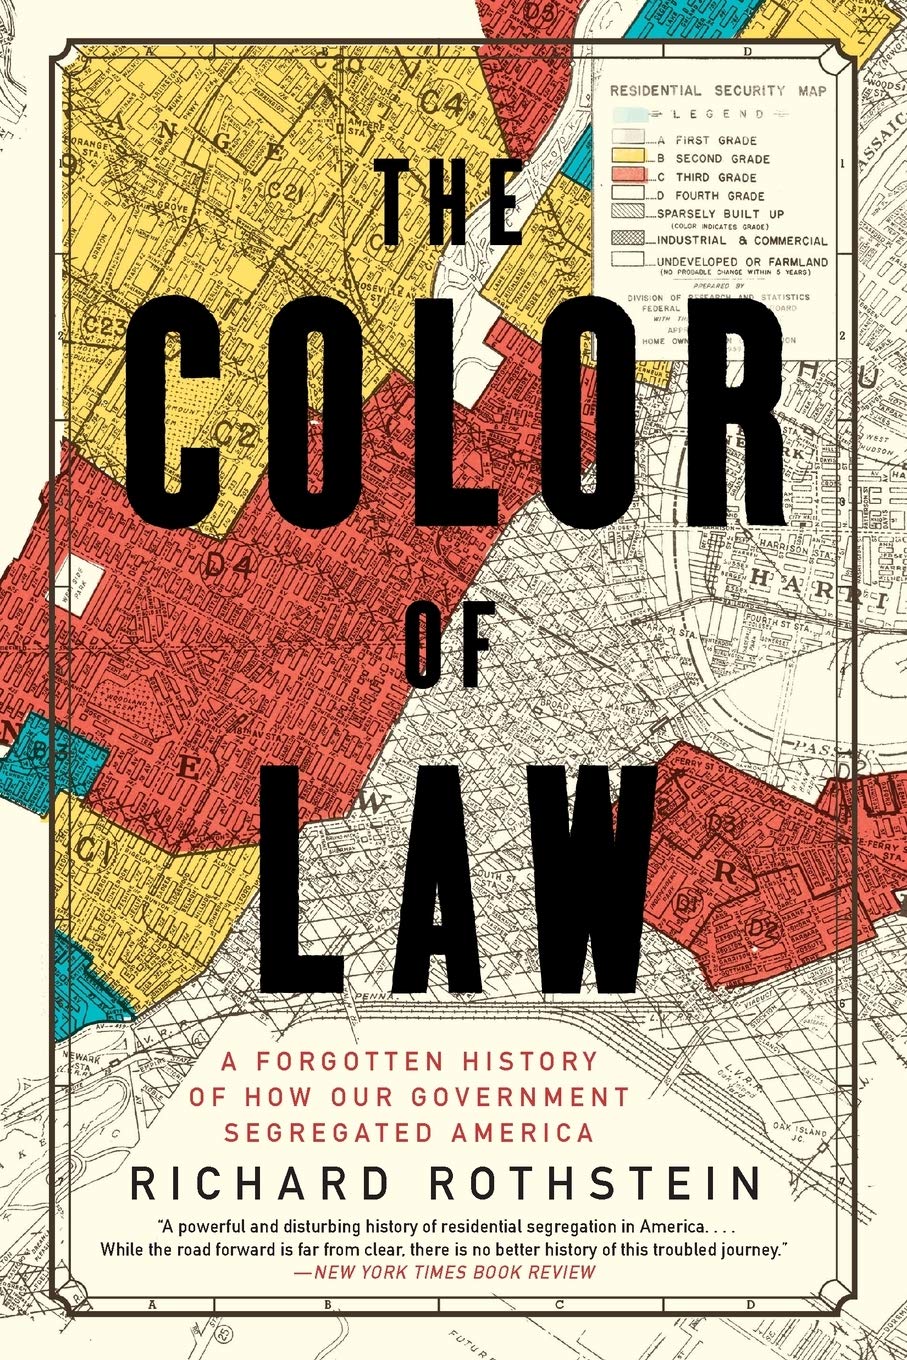 The Color of Law: A Forgotten History of How Our Government Segregated America by Richard Rothstein